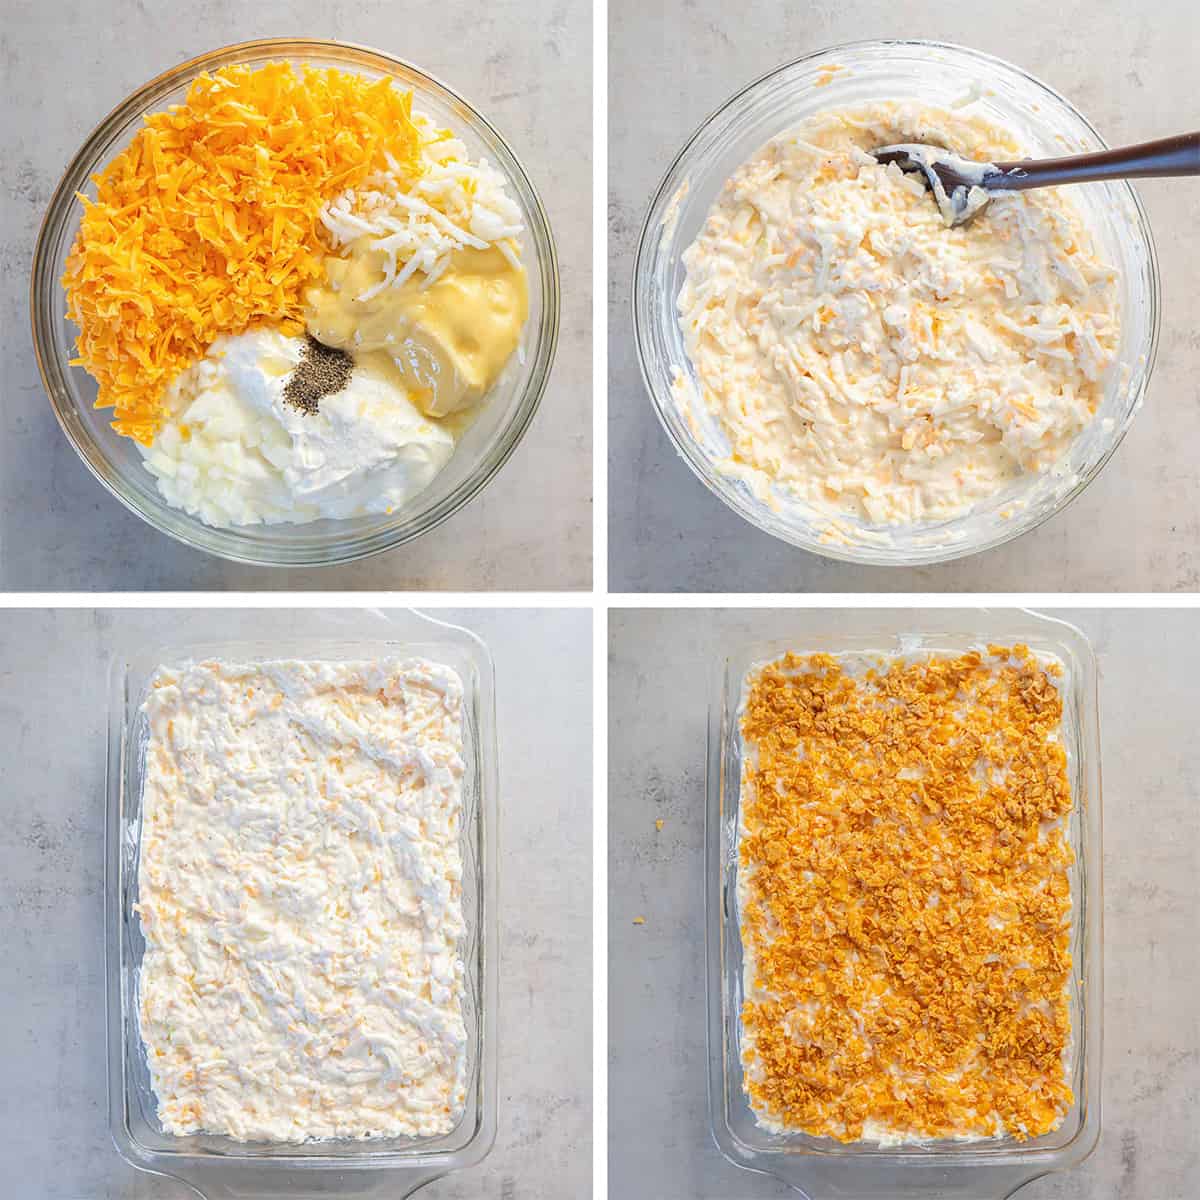 Four images of hash brown casserole ingredients in a mixing bowl and a baking dish.